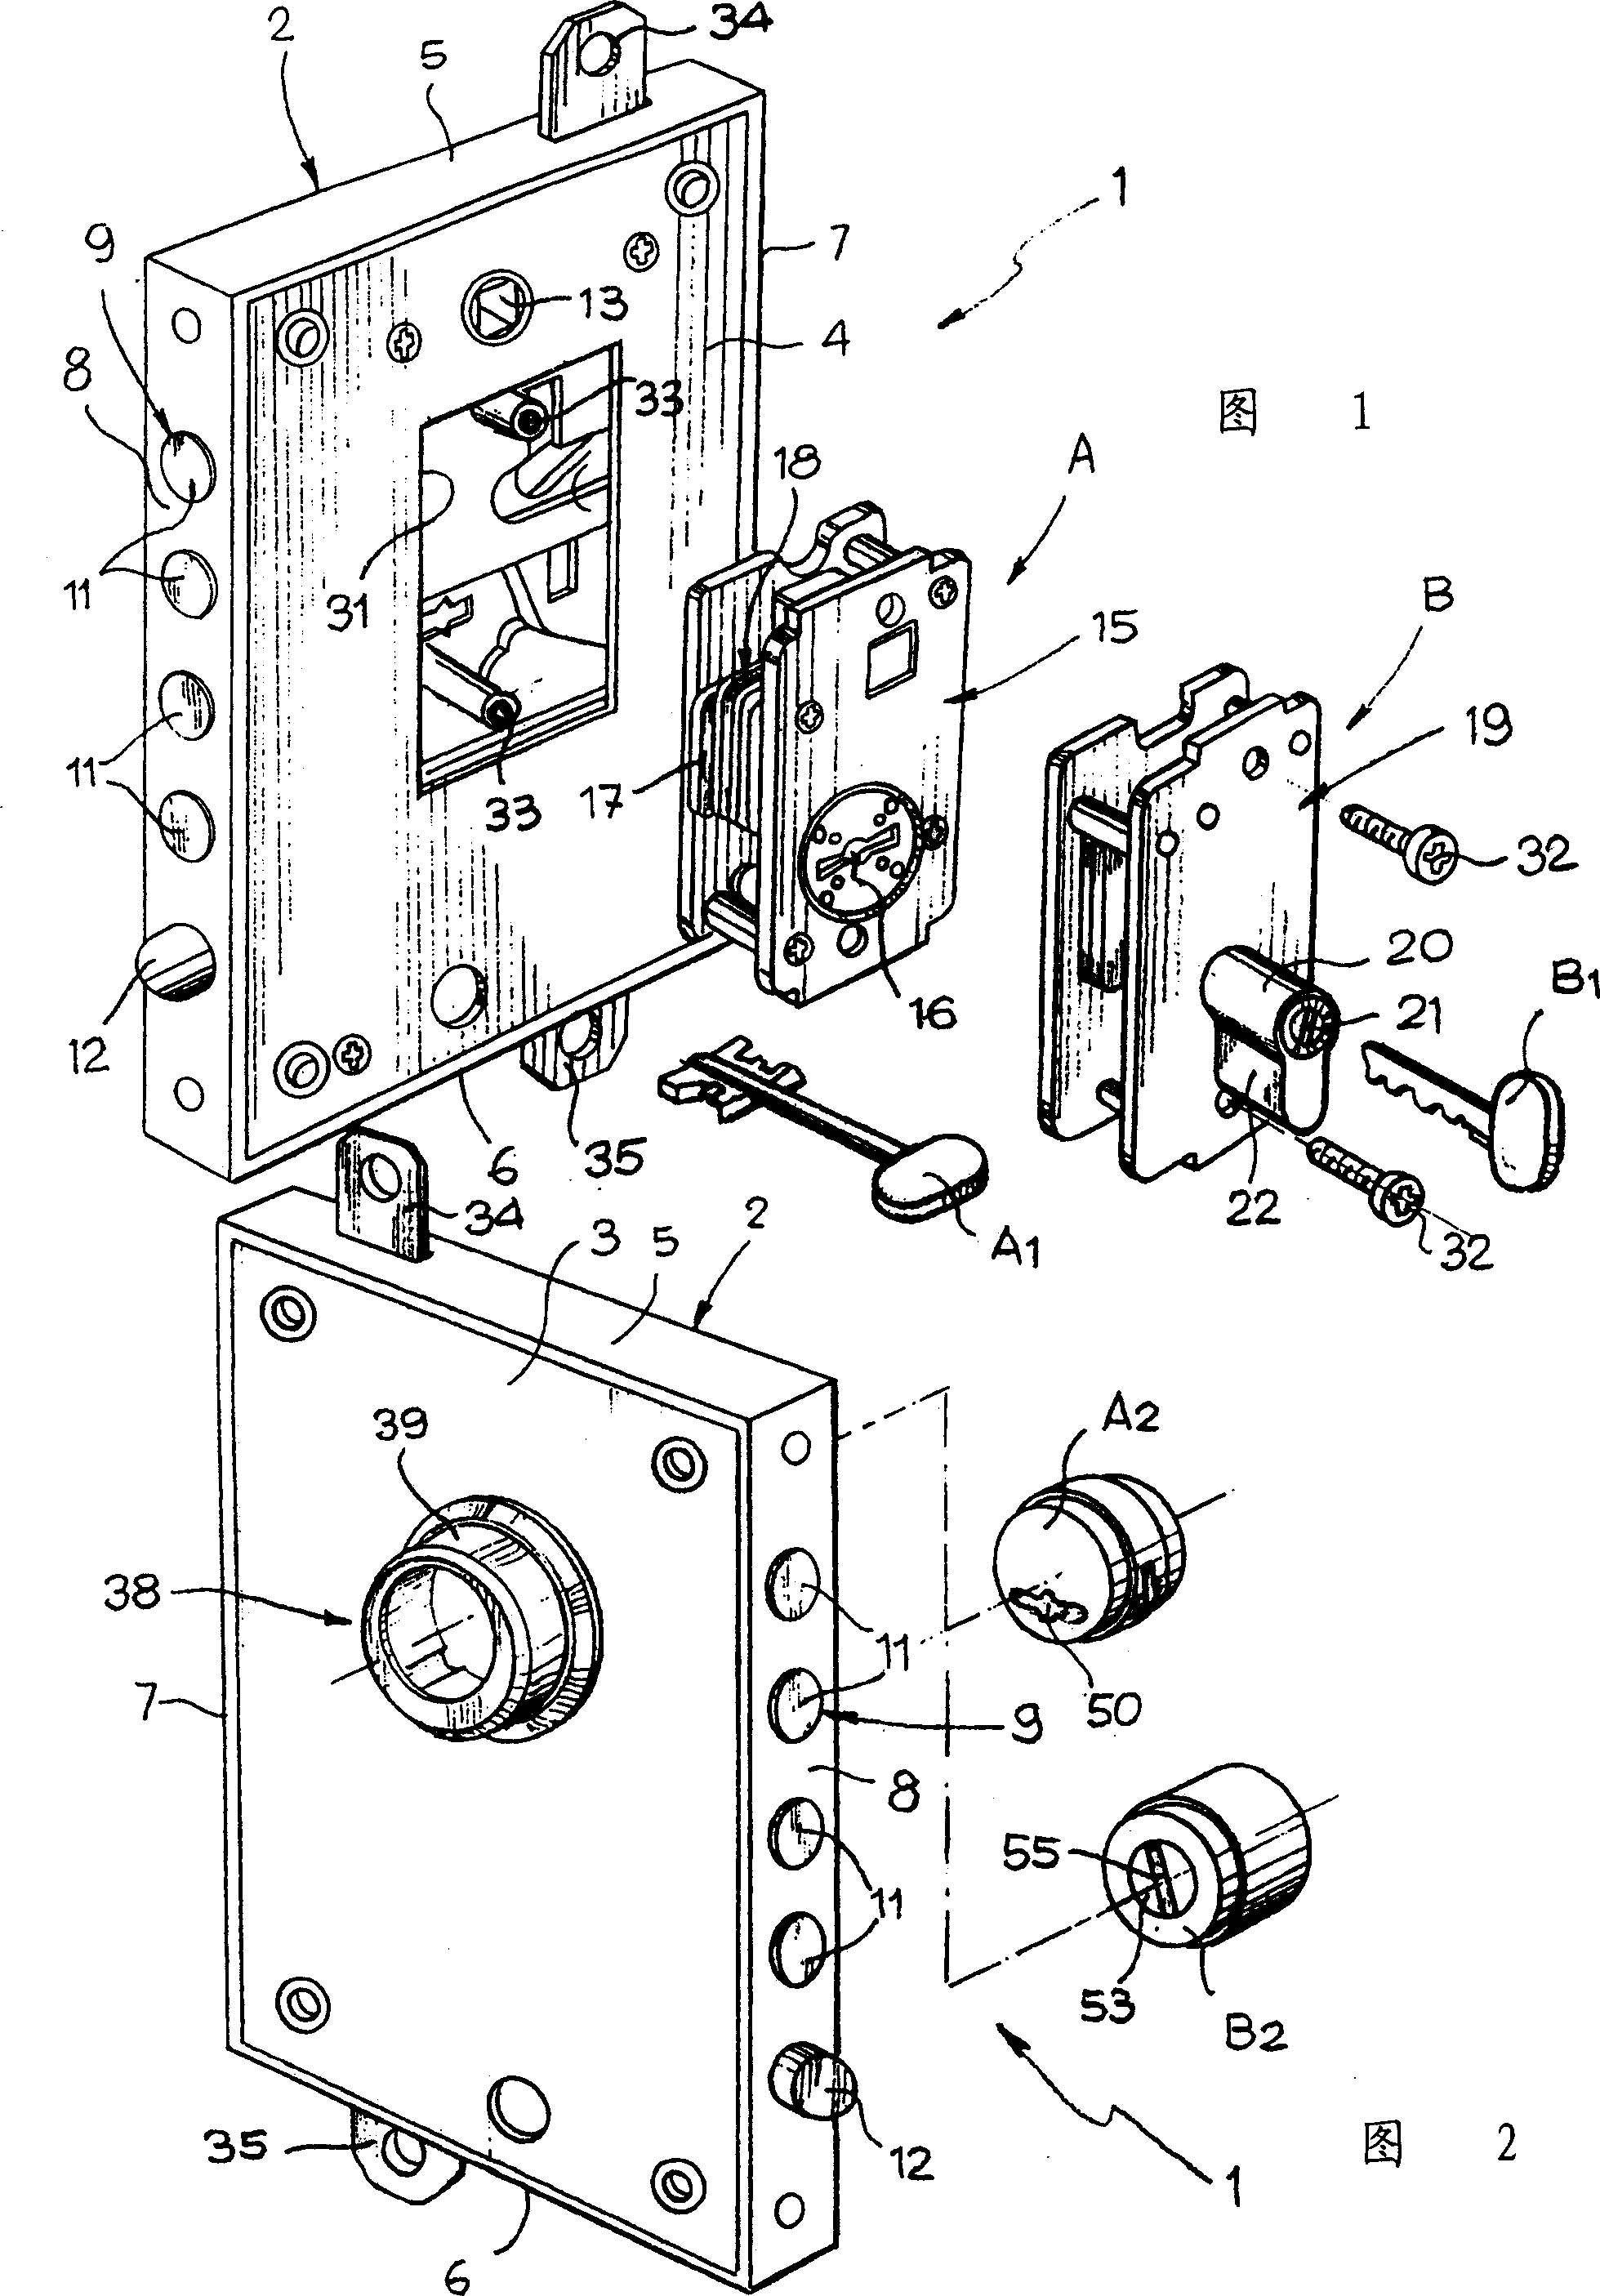 Safety lock for house door or other doors